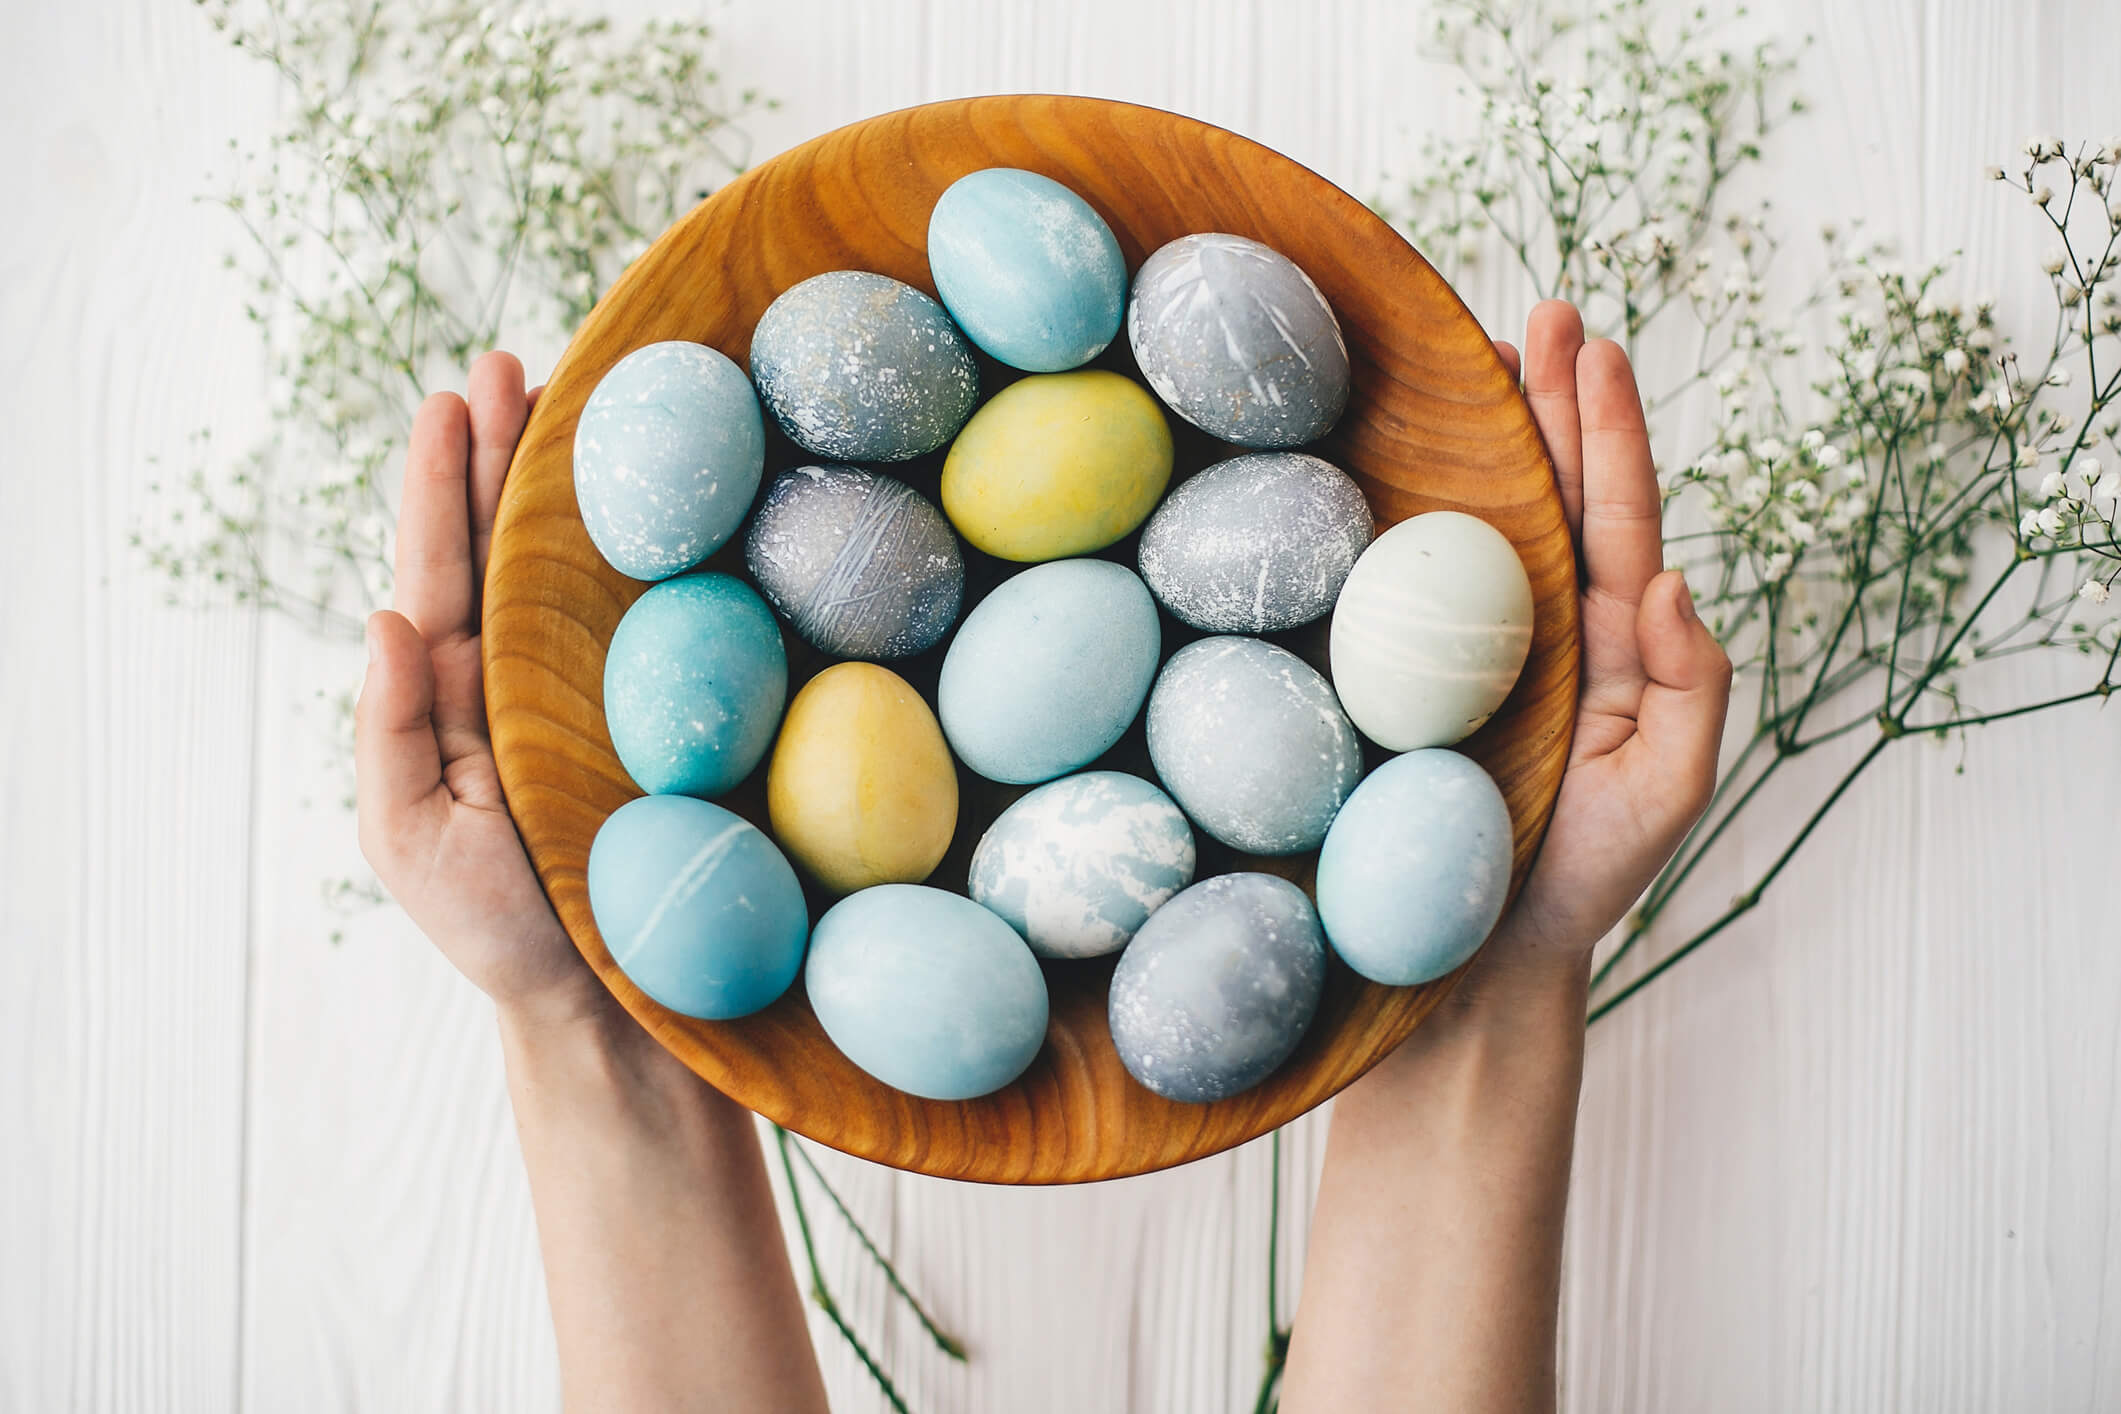 Hands holding stylish easter eggs in wooden plate with spring flowers on white wooden background. Modern easter eggs painted with natural dye in blue, grey, yellow color. Happy Easter